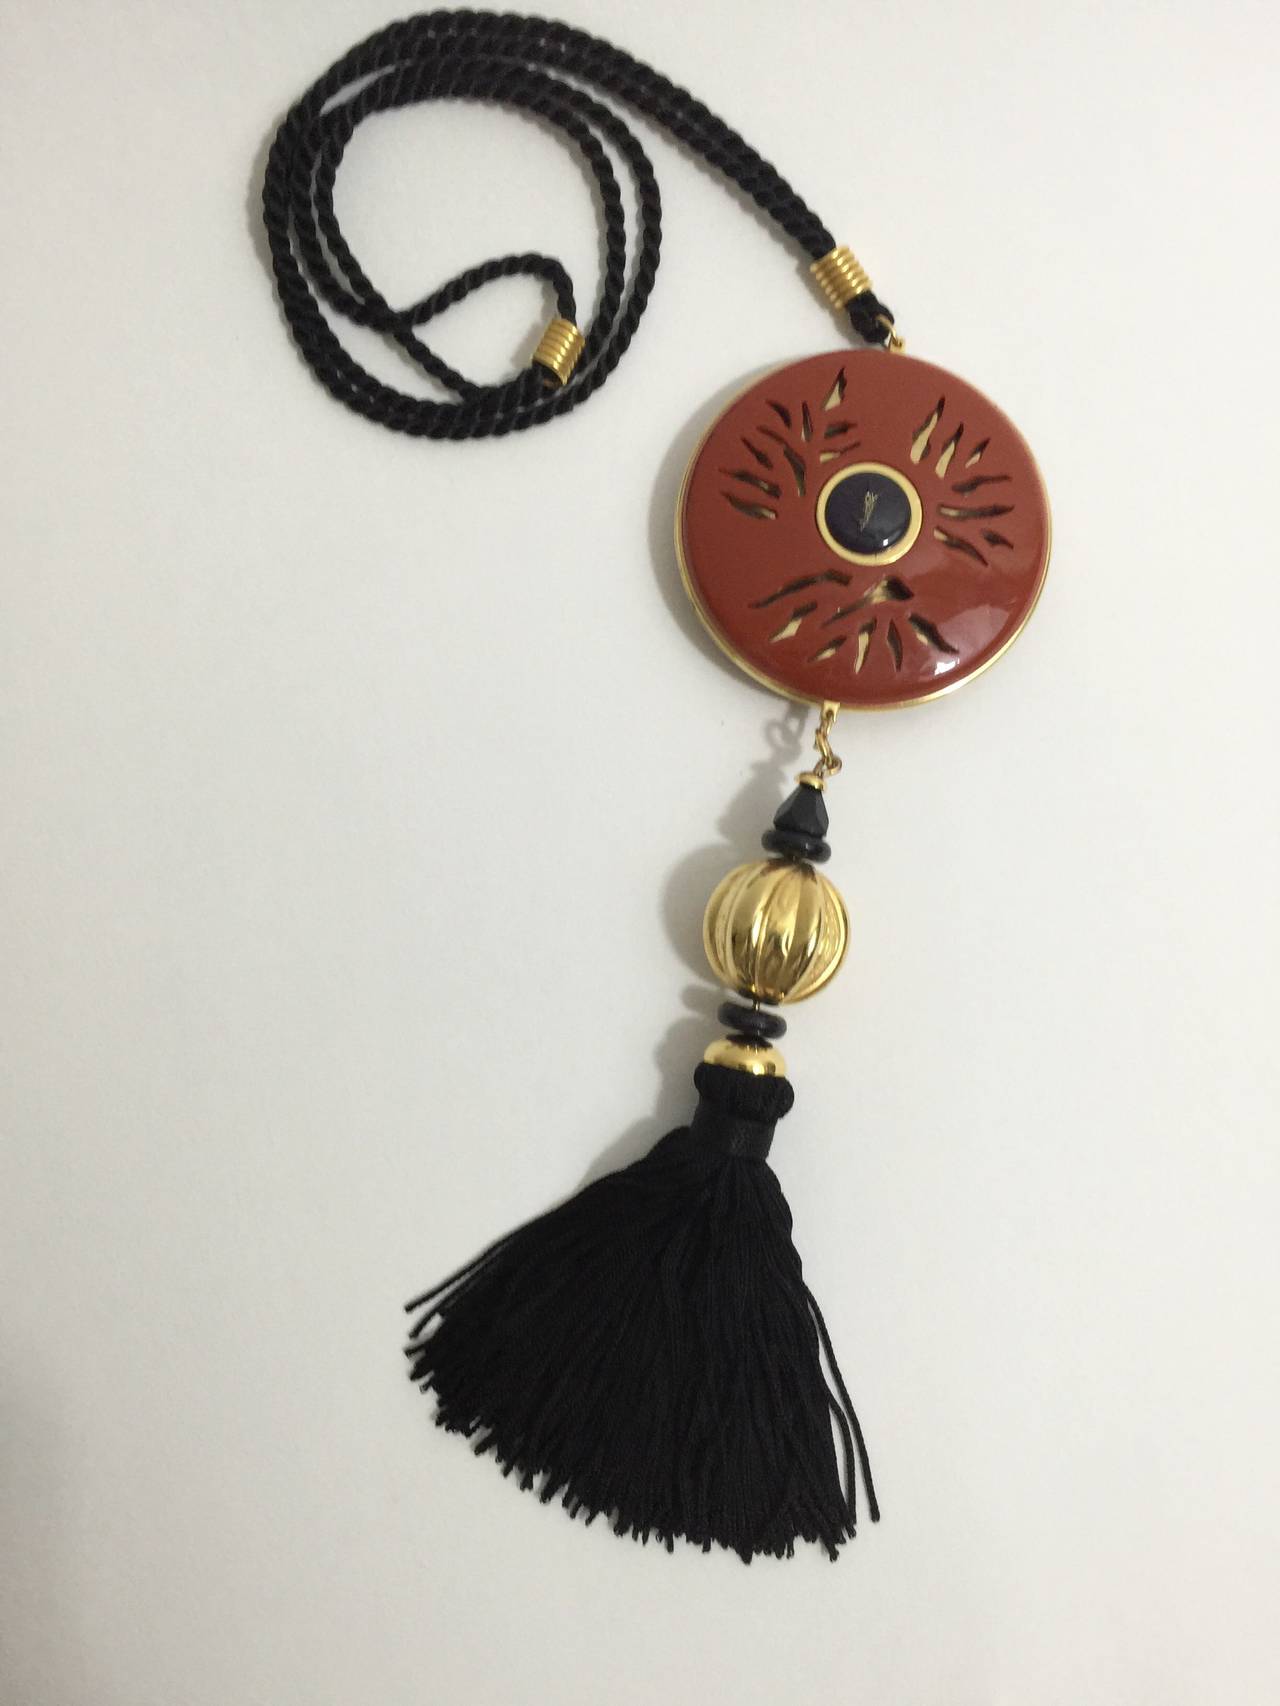 This Vintage YSL Opium Tassel Necklace is beautiful and collectable.  
Opium perfume was first released in 1977,and  the opium necklaces have been discontinued since the mid 1980's. 
A deep orange disc pendant with open work detailing and YSL